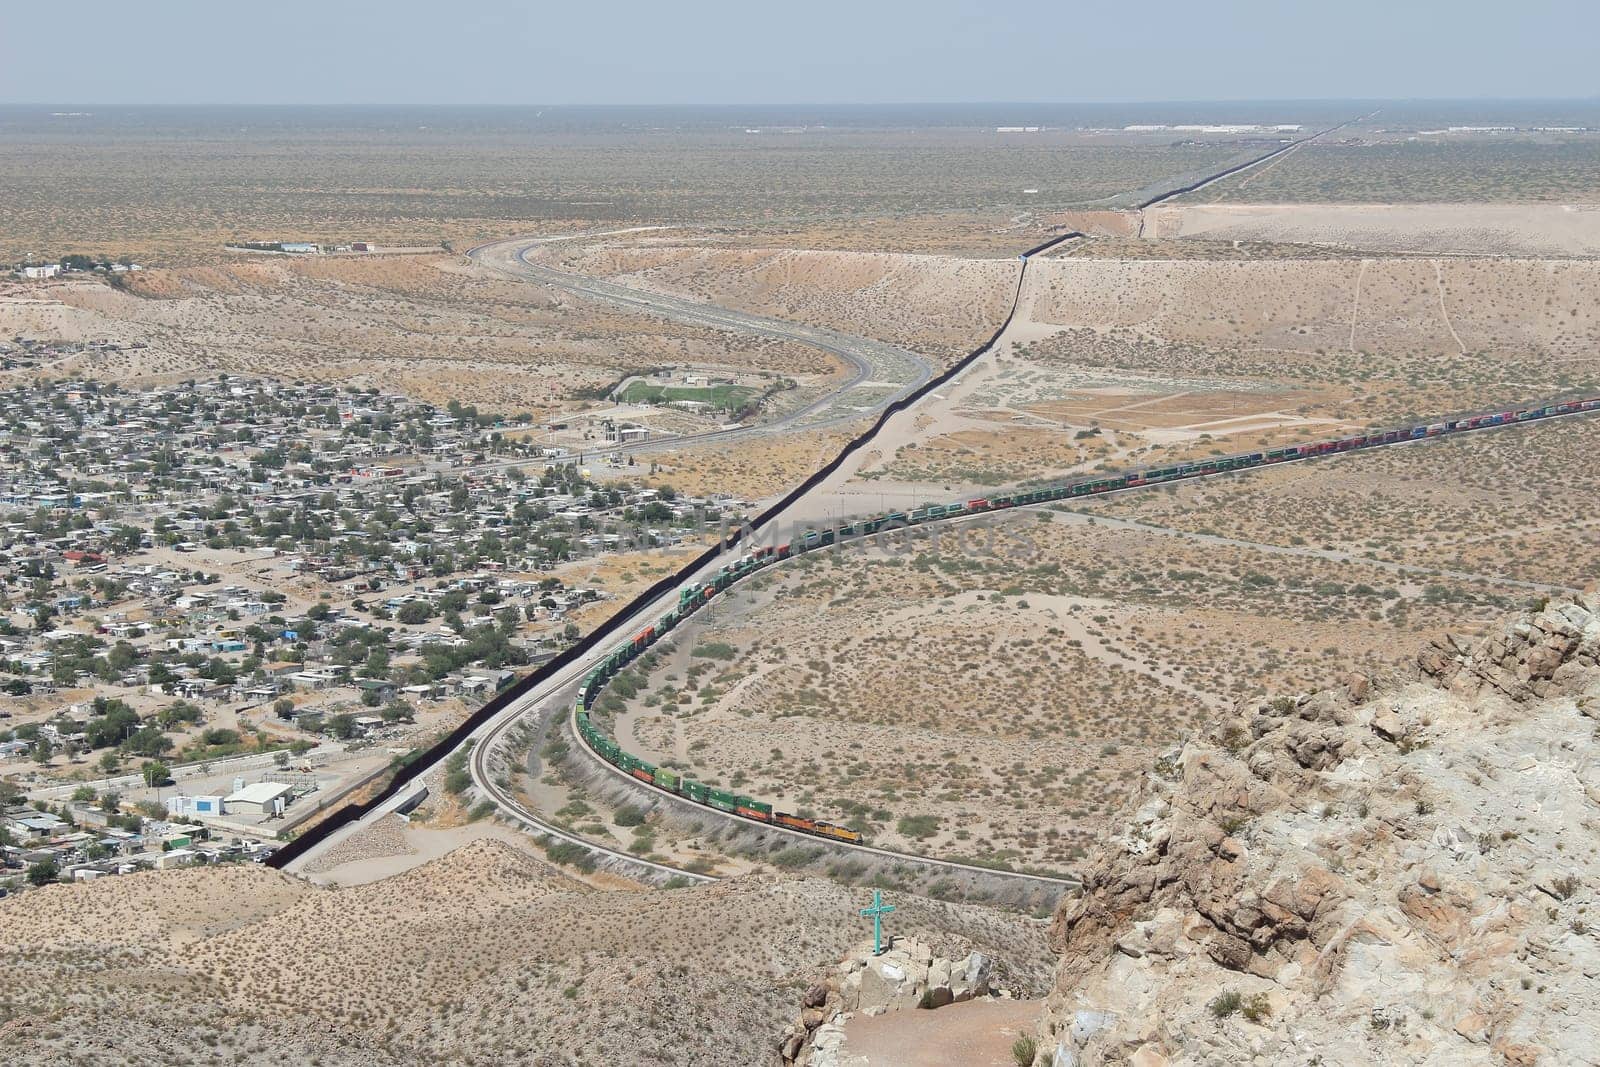 Border wall or fence and train, New Mexico running parallel to freight train on U.S. side of border by Marcielito